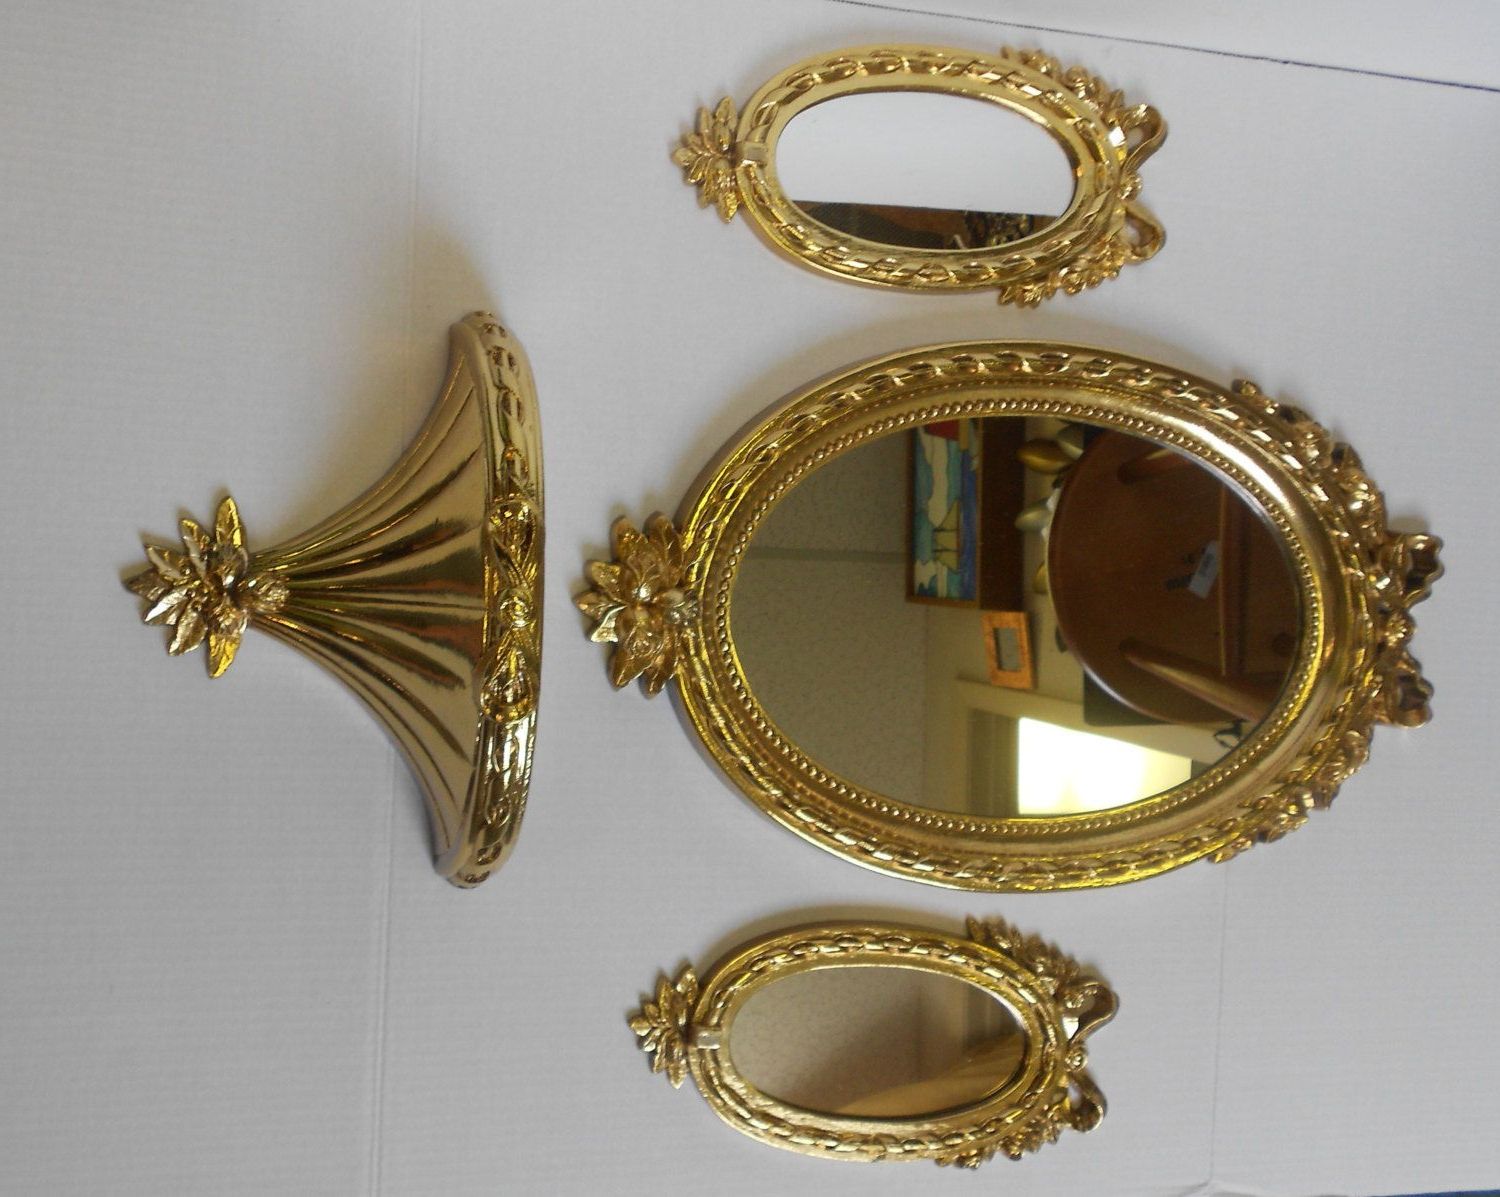 Fashionable Oval Wide Lip Wall Mirrors For Set Of 3 Vintage Oval Wall Mirrors And Sconce,three Wall Ornate Baroque (View 15 of 15)